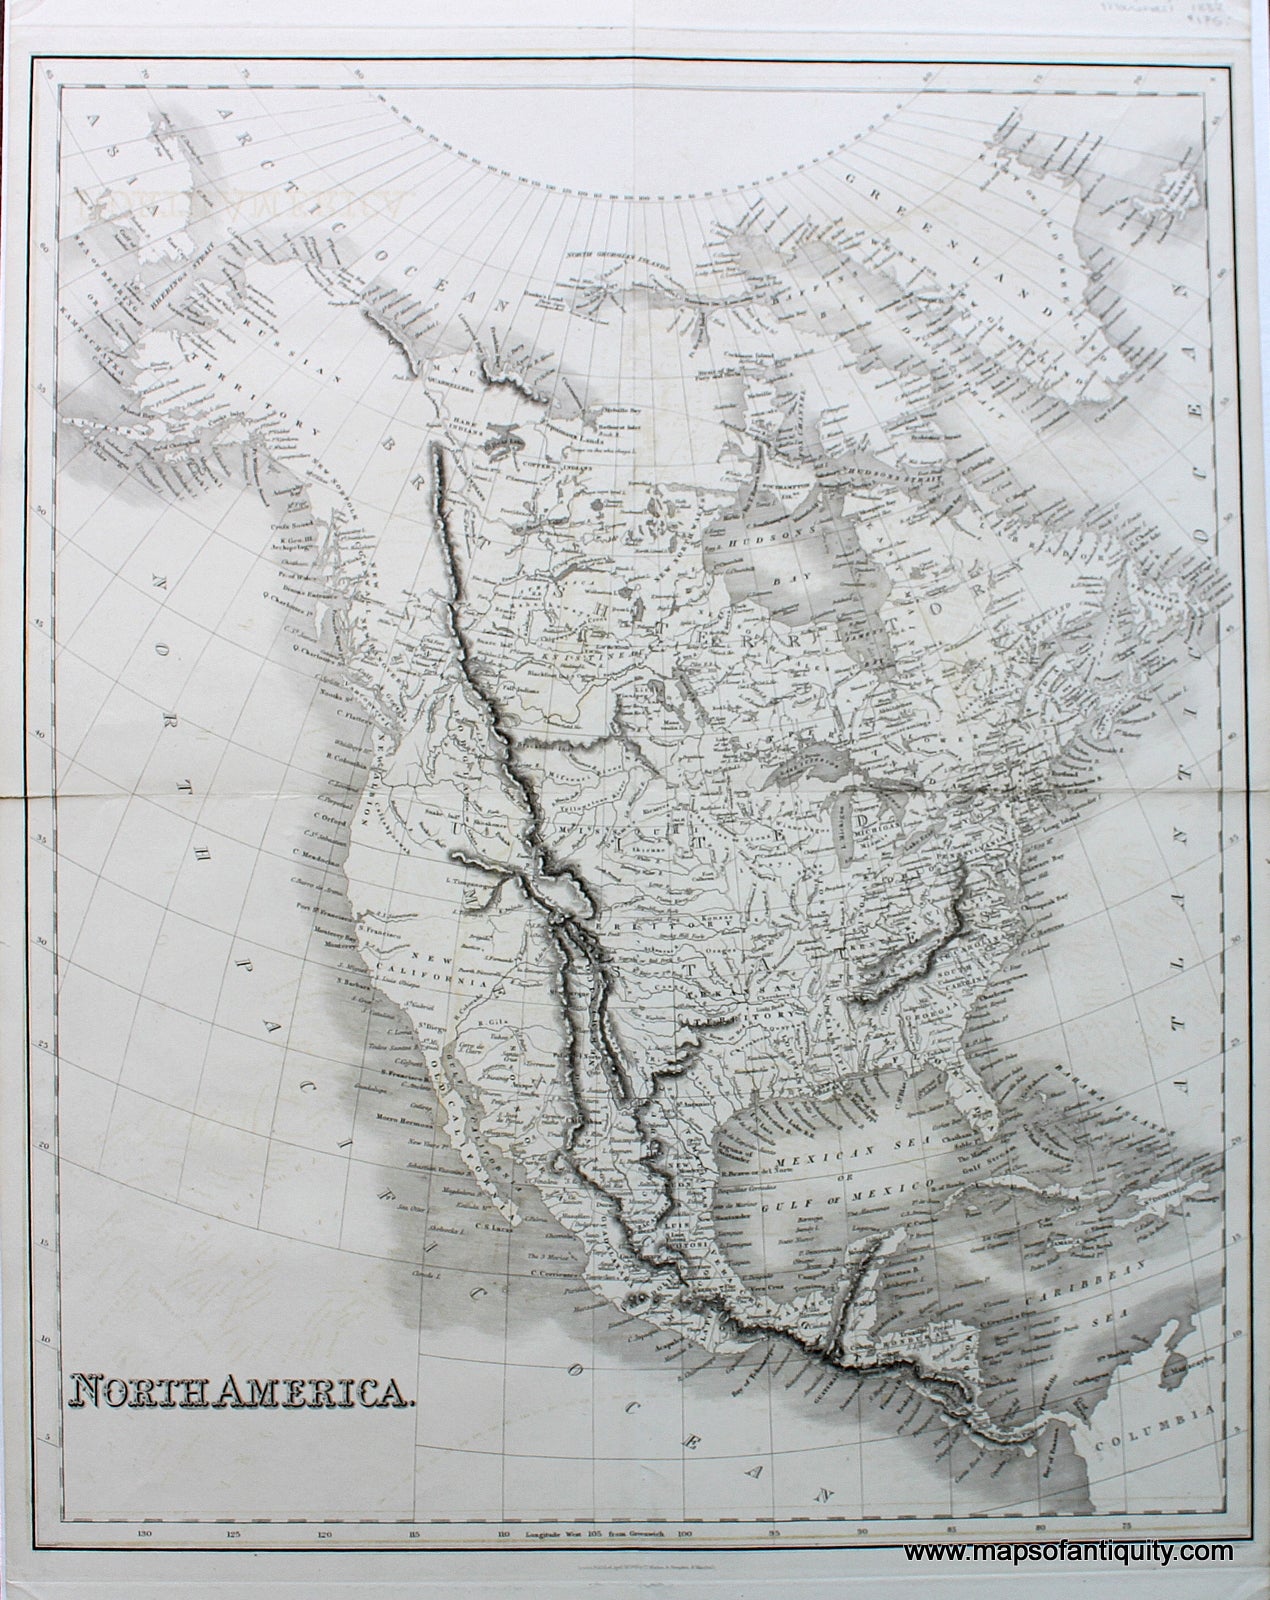 Black-and-White-Antique-Map-North-America-**********-North-America-North-America-General-1832-Hinton-Simpkin-&-Marshall-Maps-Of-Antiquity